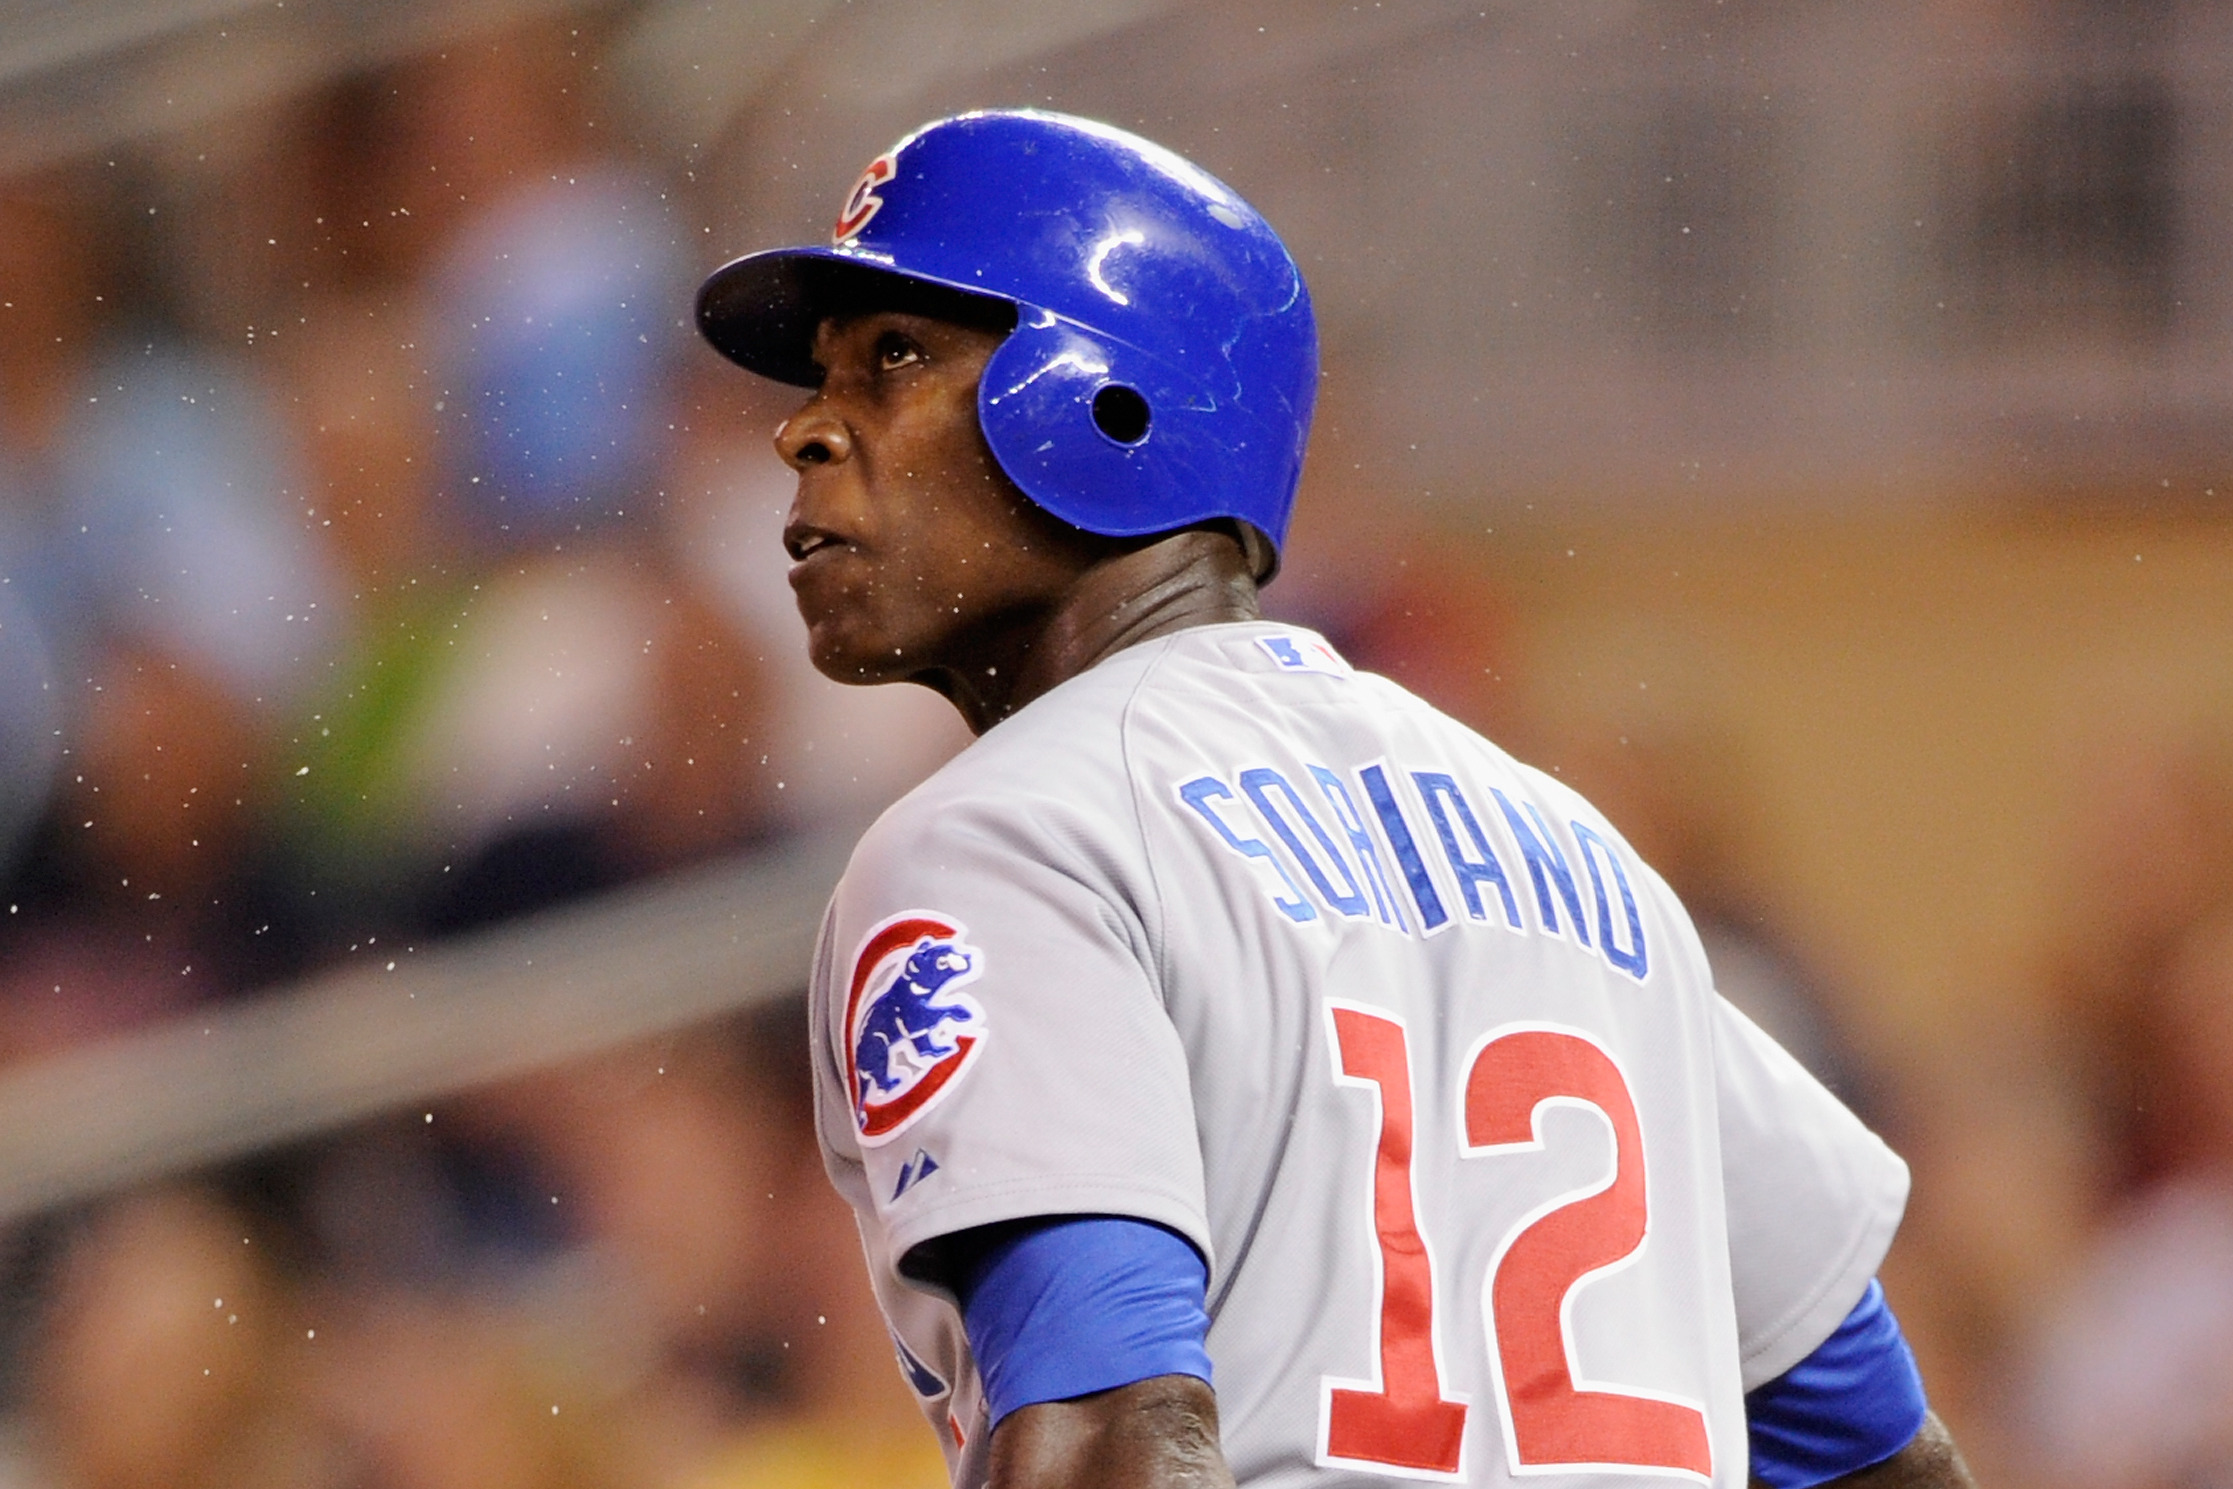 Alfonso Soriano looks ridiculously jacked in new pictures